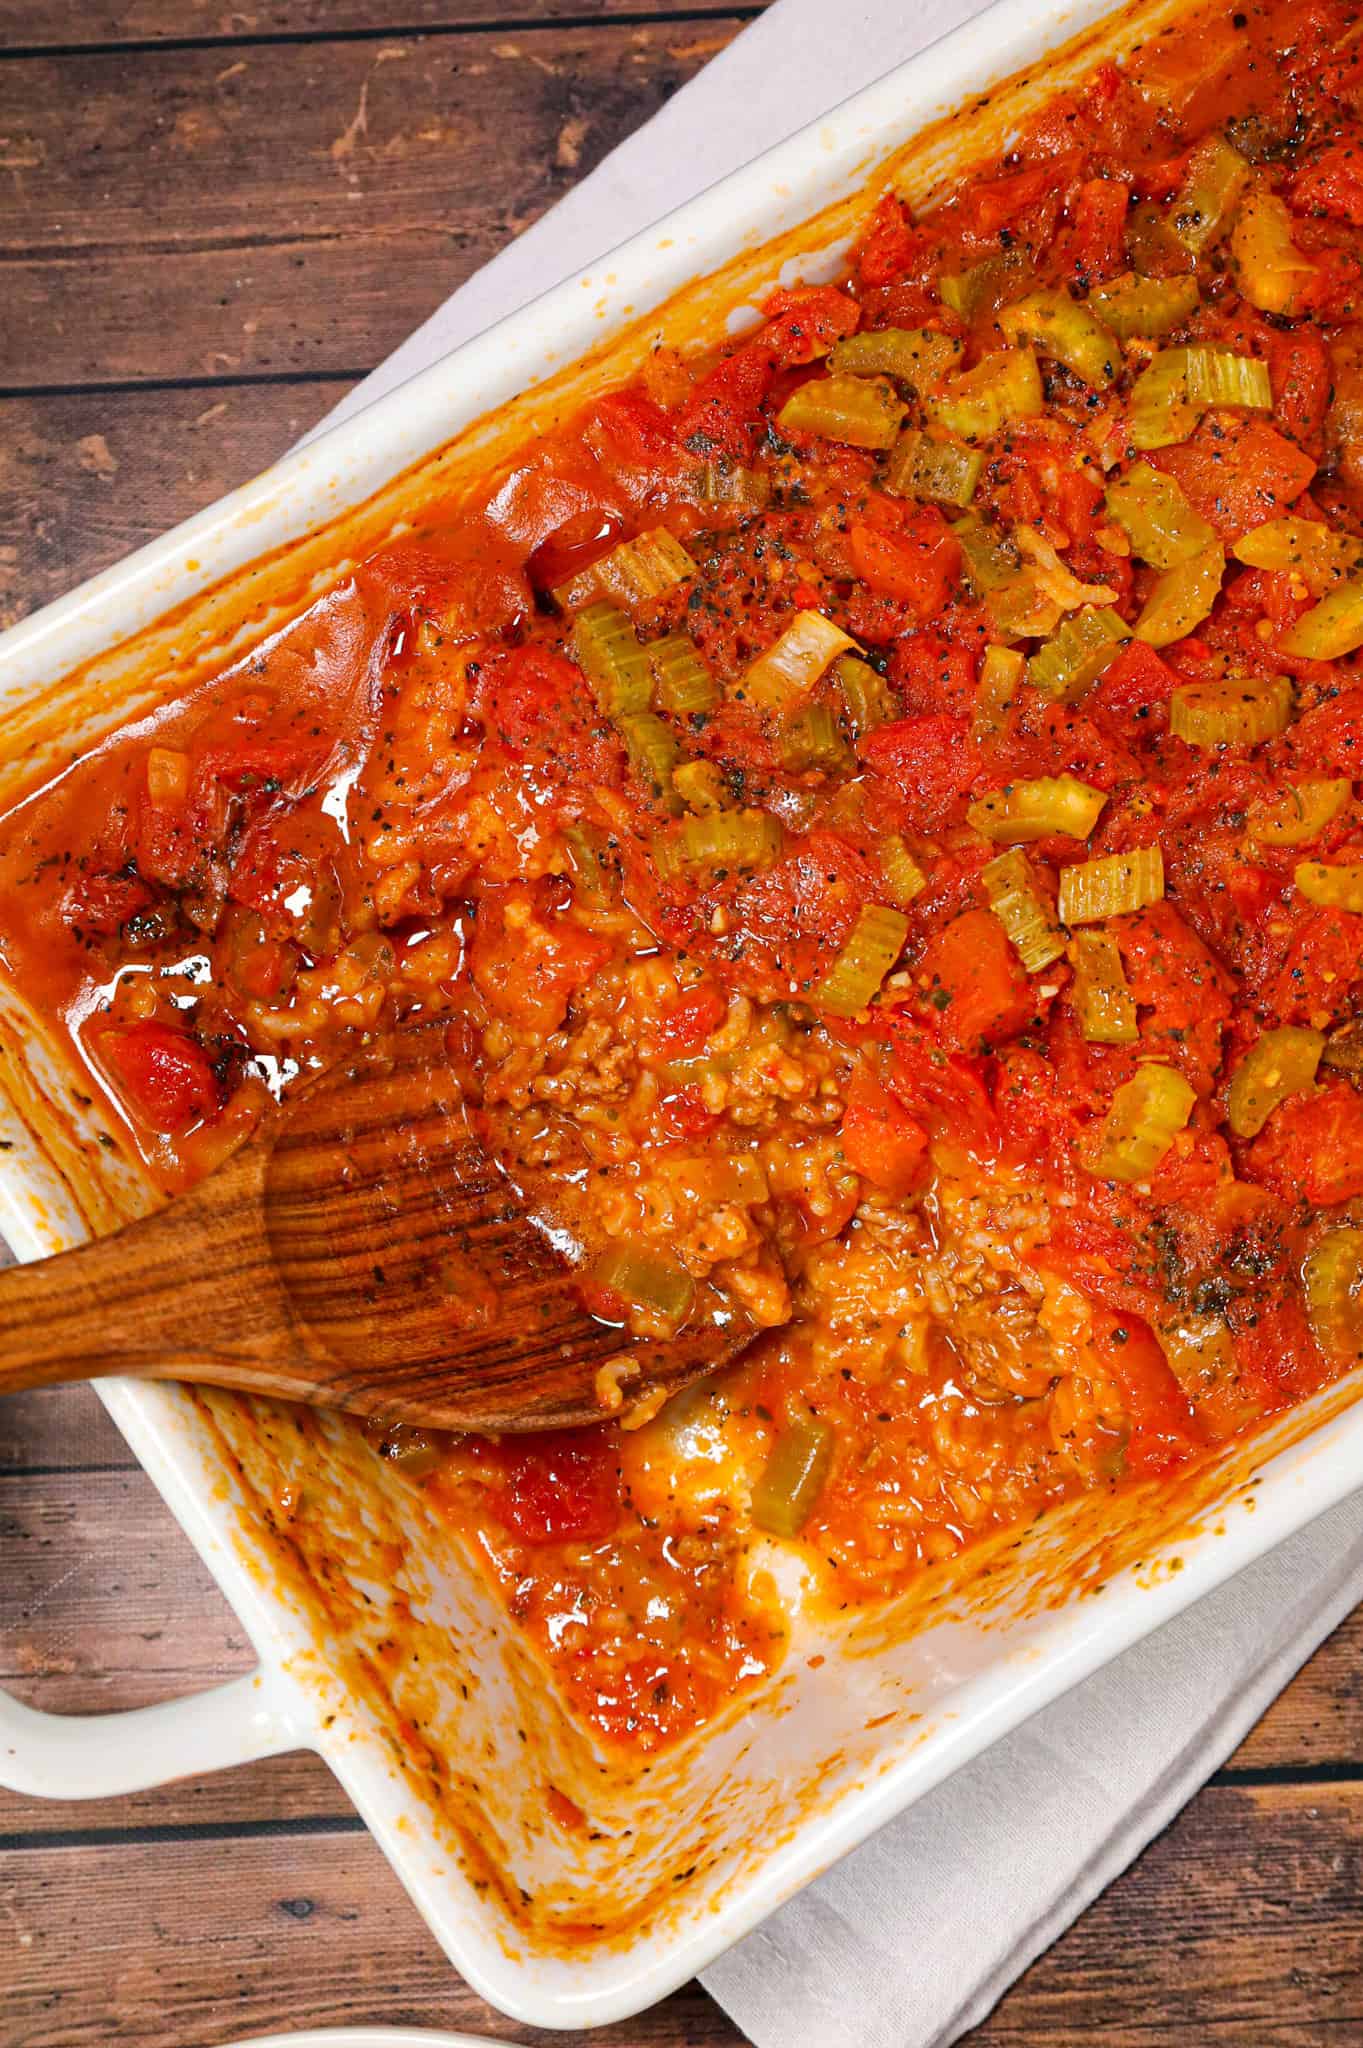 Shipwreck Casserole is a hearty ground beef casserole loaded with sliced potatoes, long grain rice, diced tomatoes, celery and tomato soup.